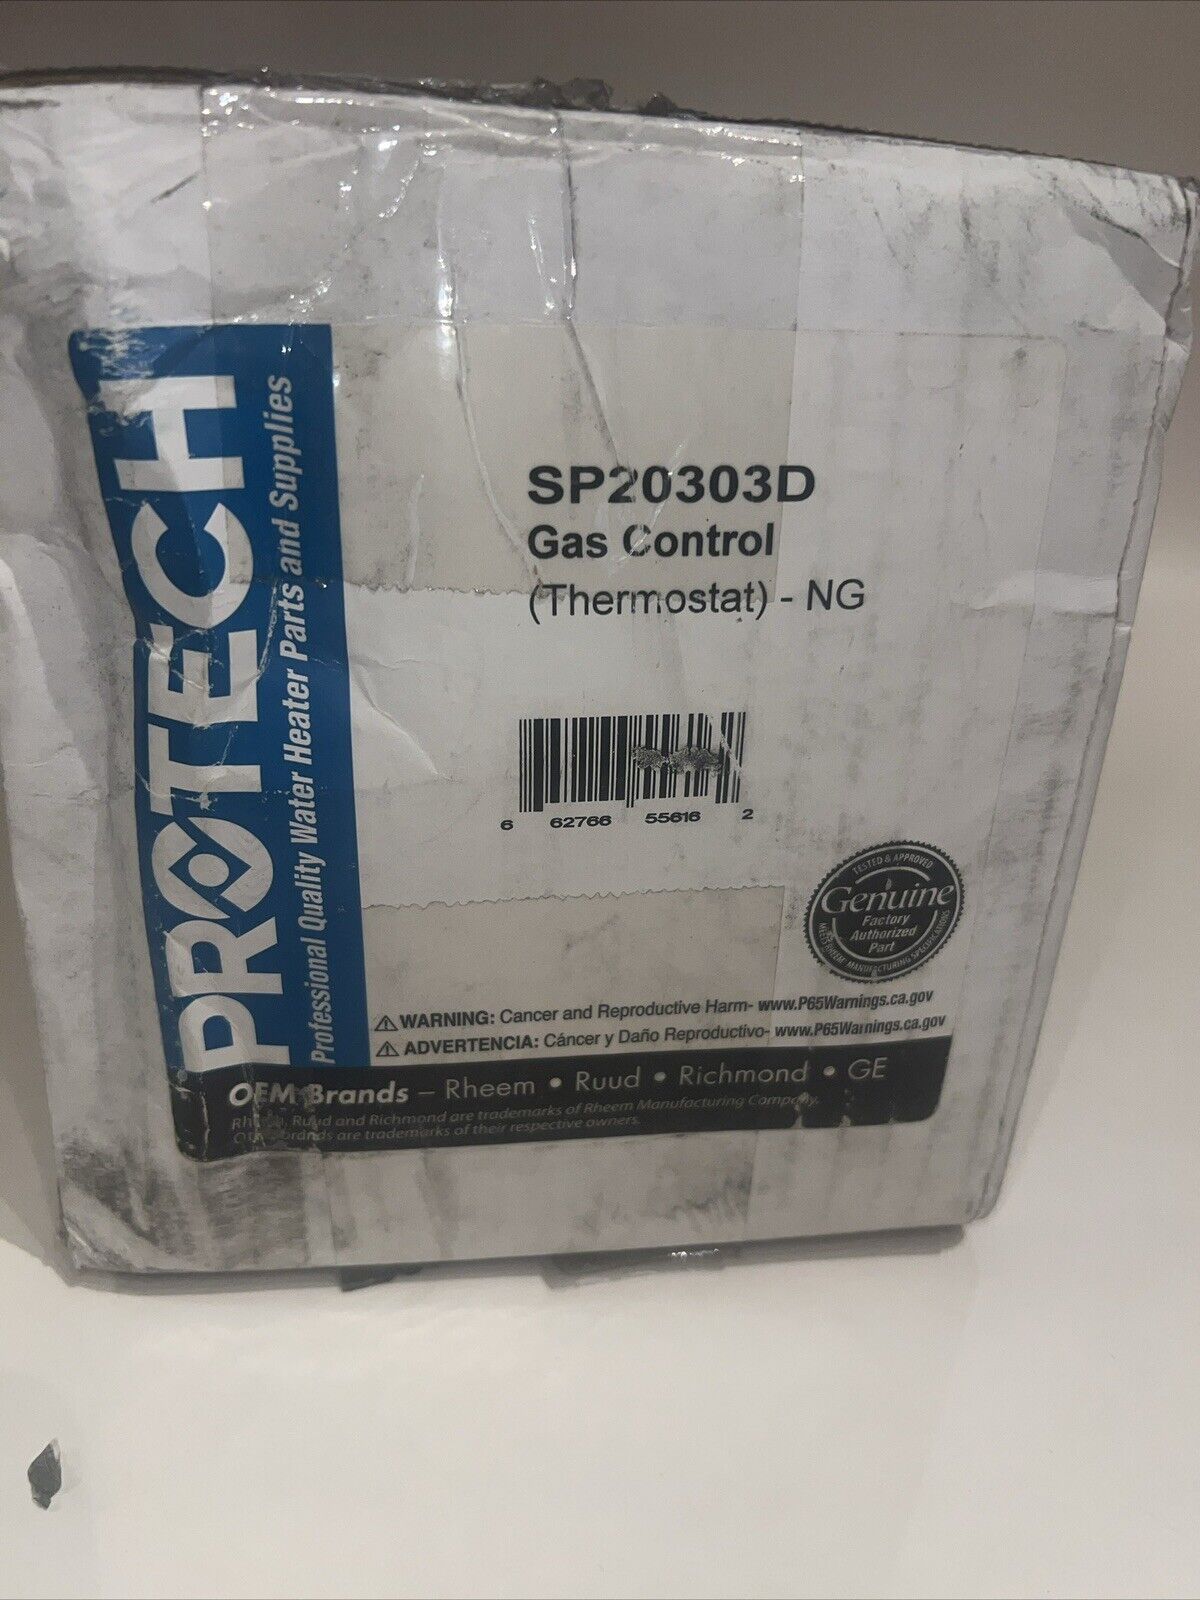 Protech SP20303D Gas Control (Thermostat) - NG   OEM Brand